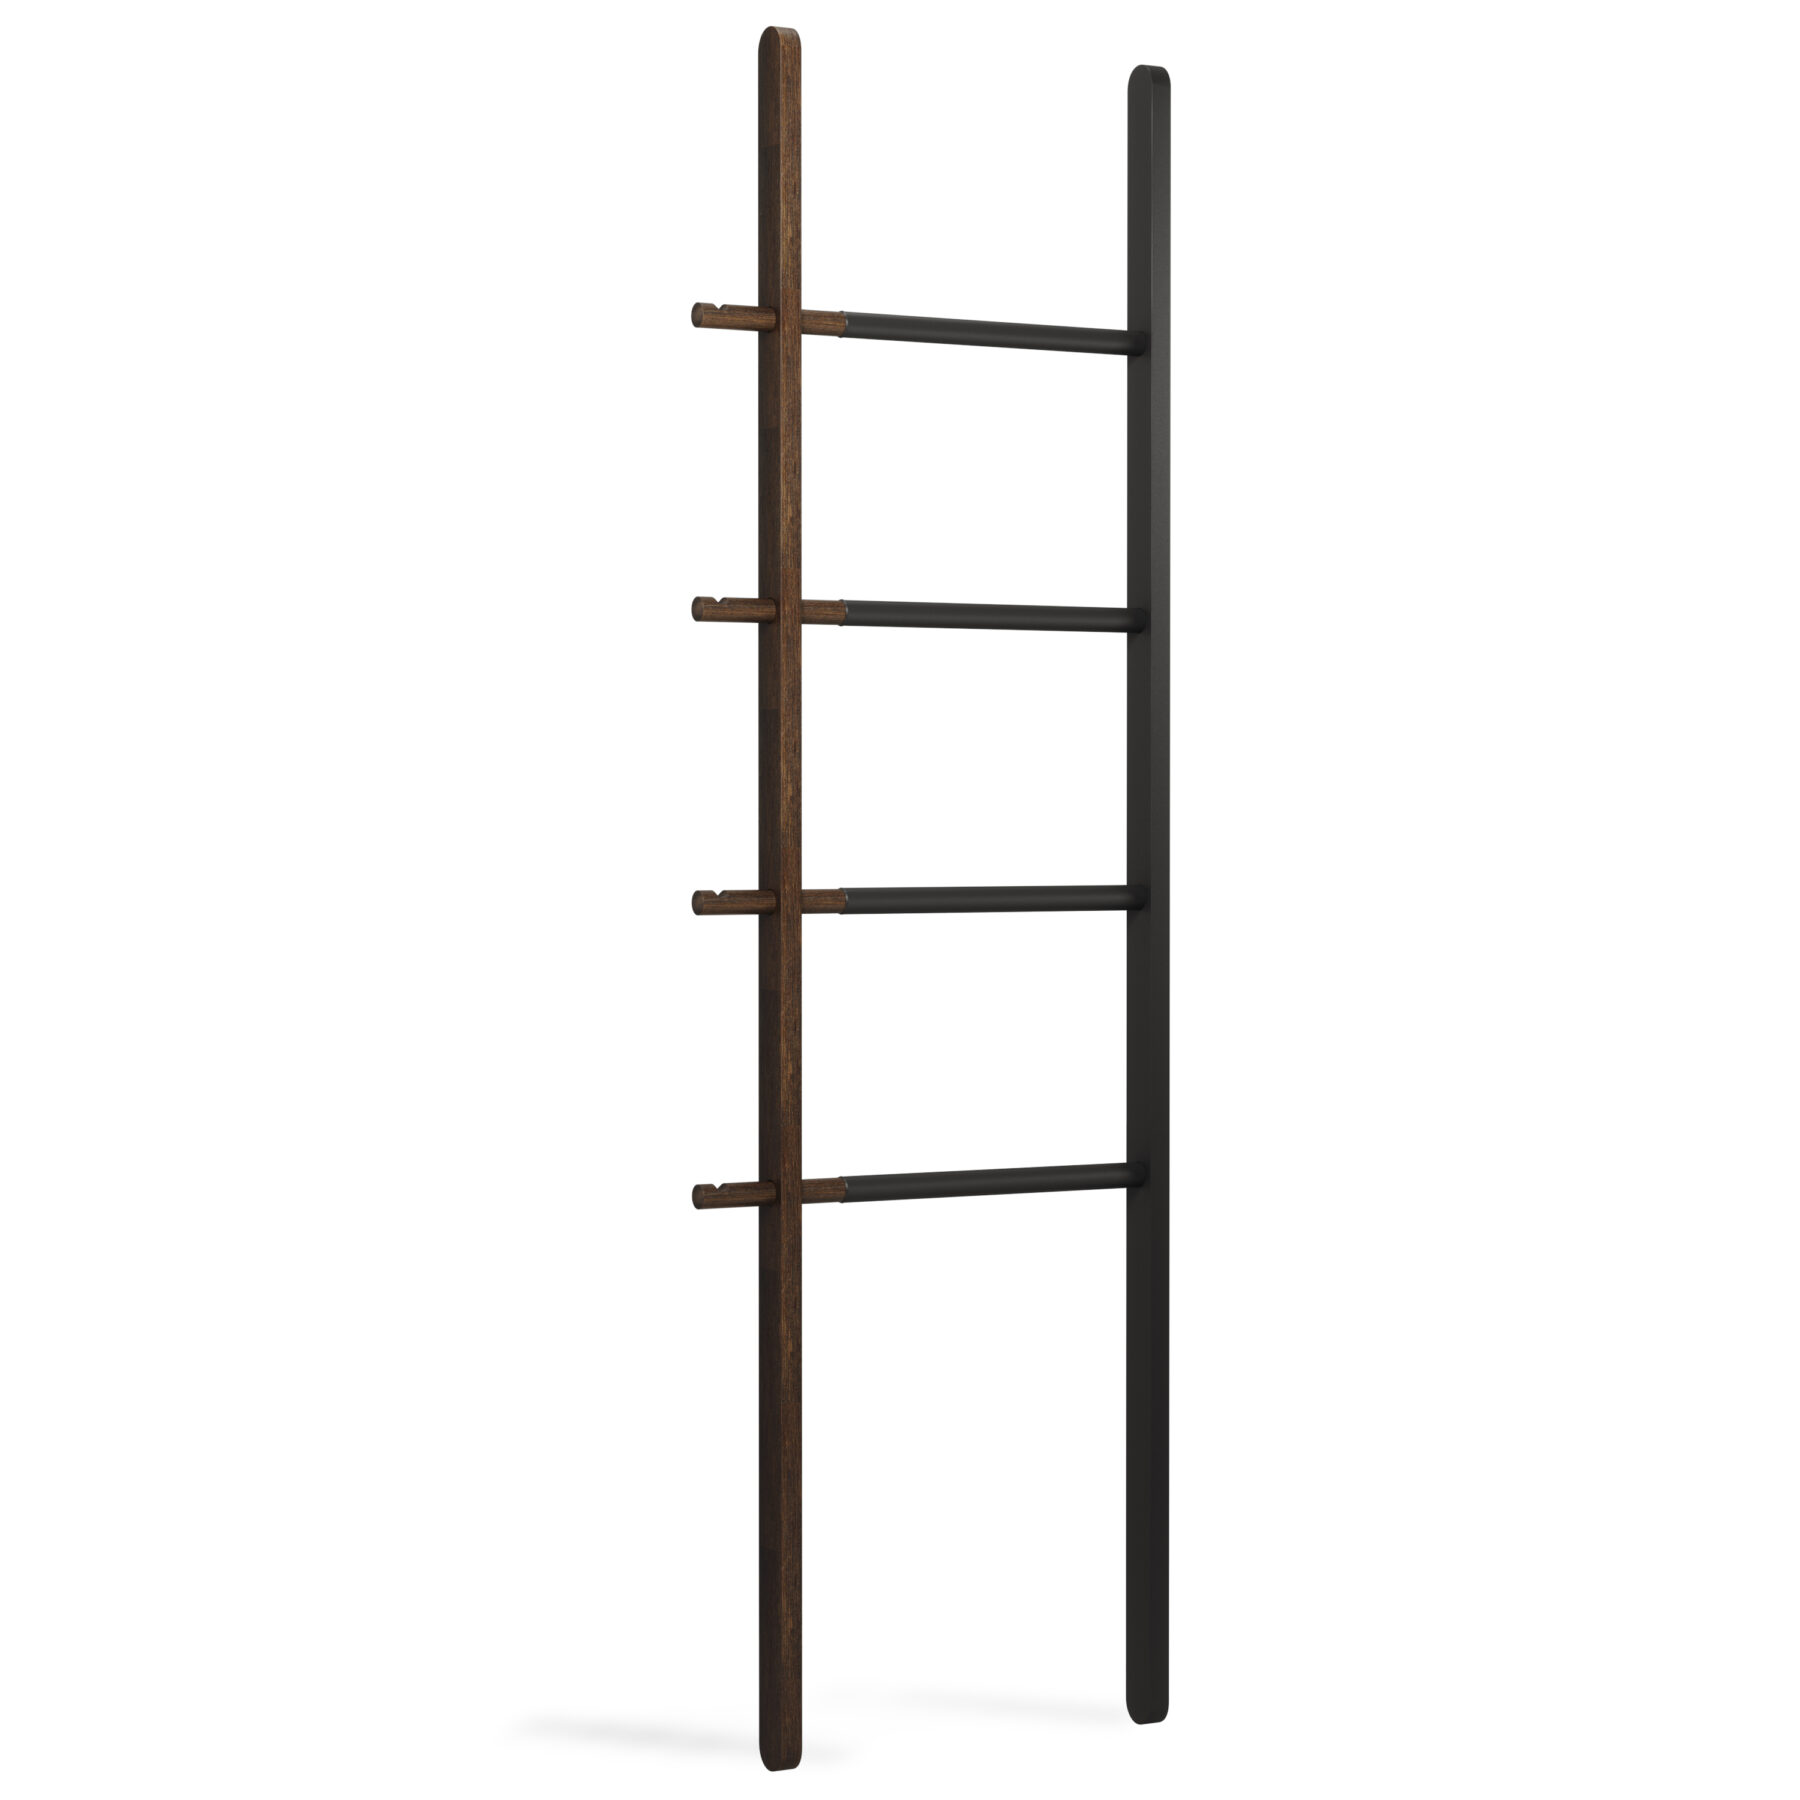 or clothing organizer. Note: Hub Ladder is not intended for climbing